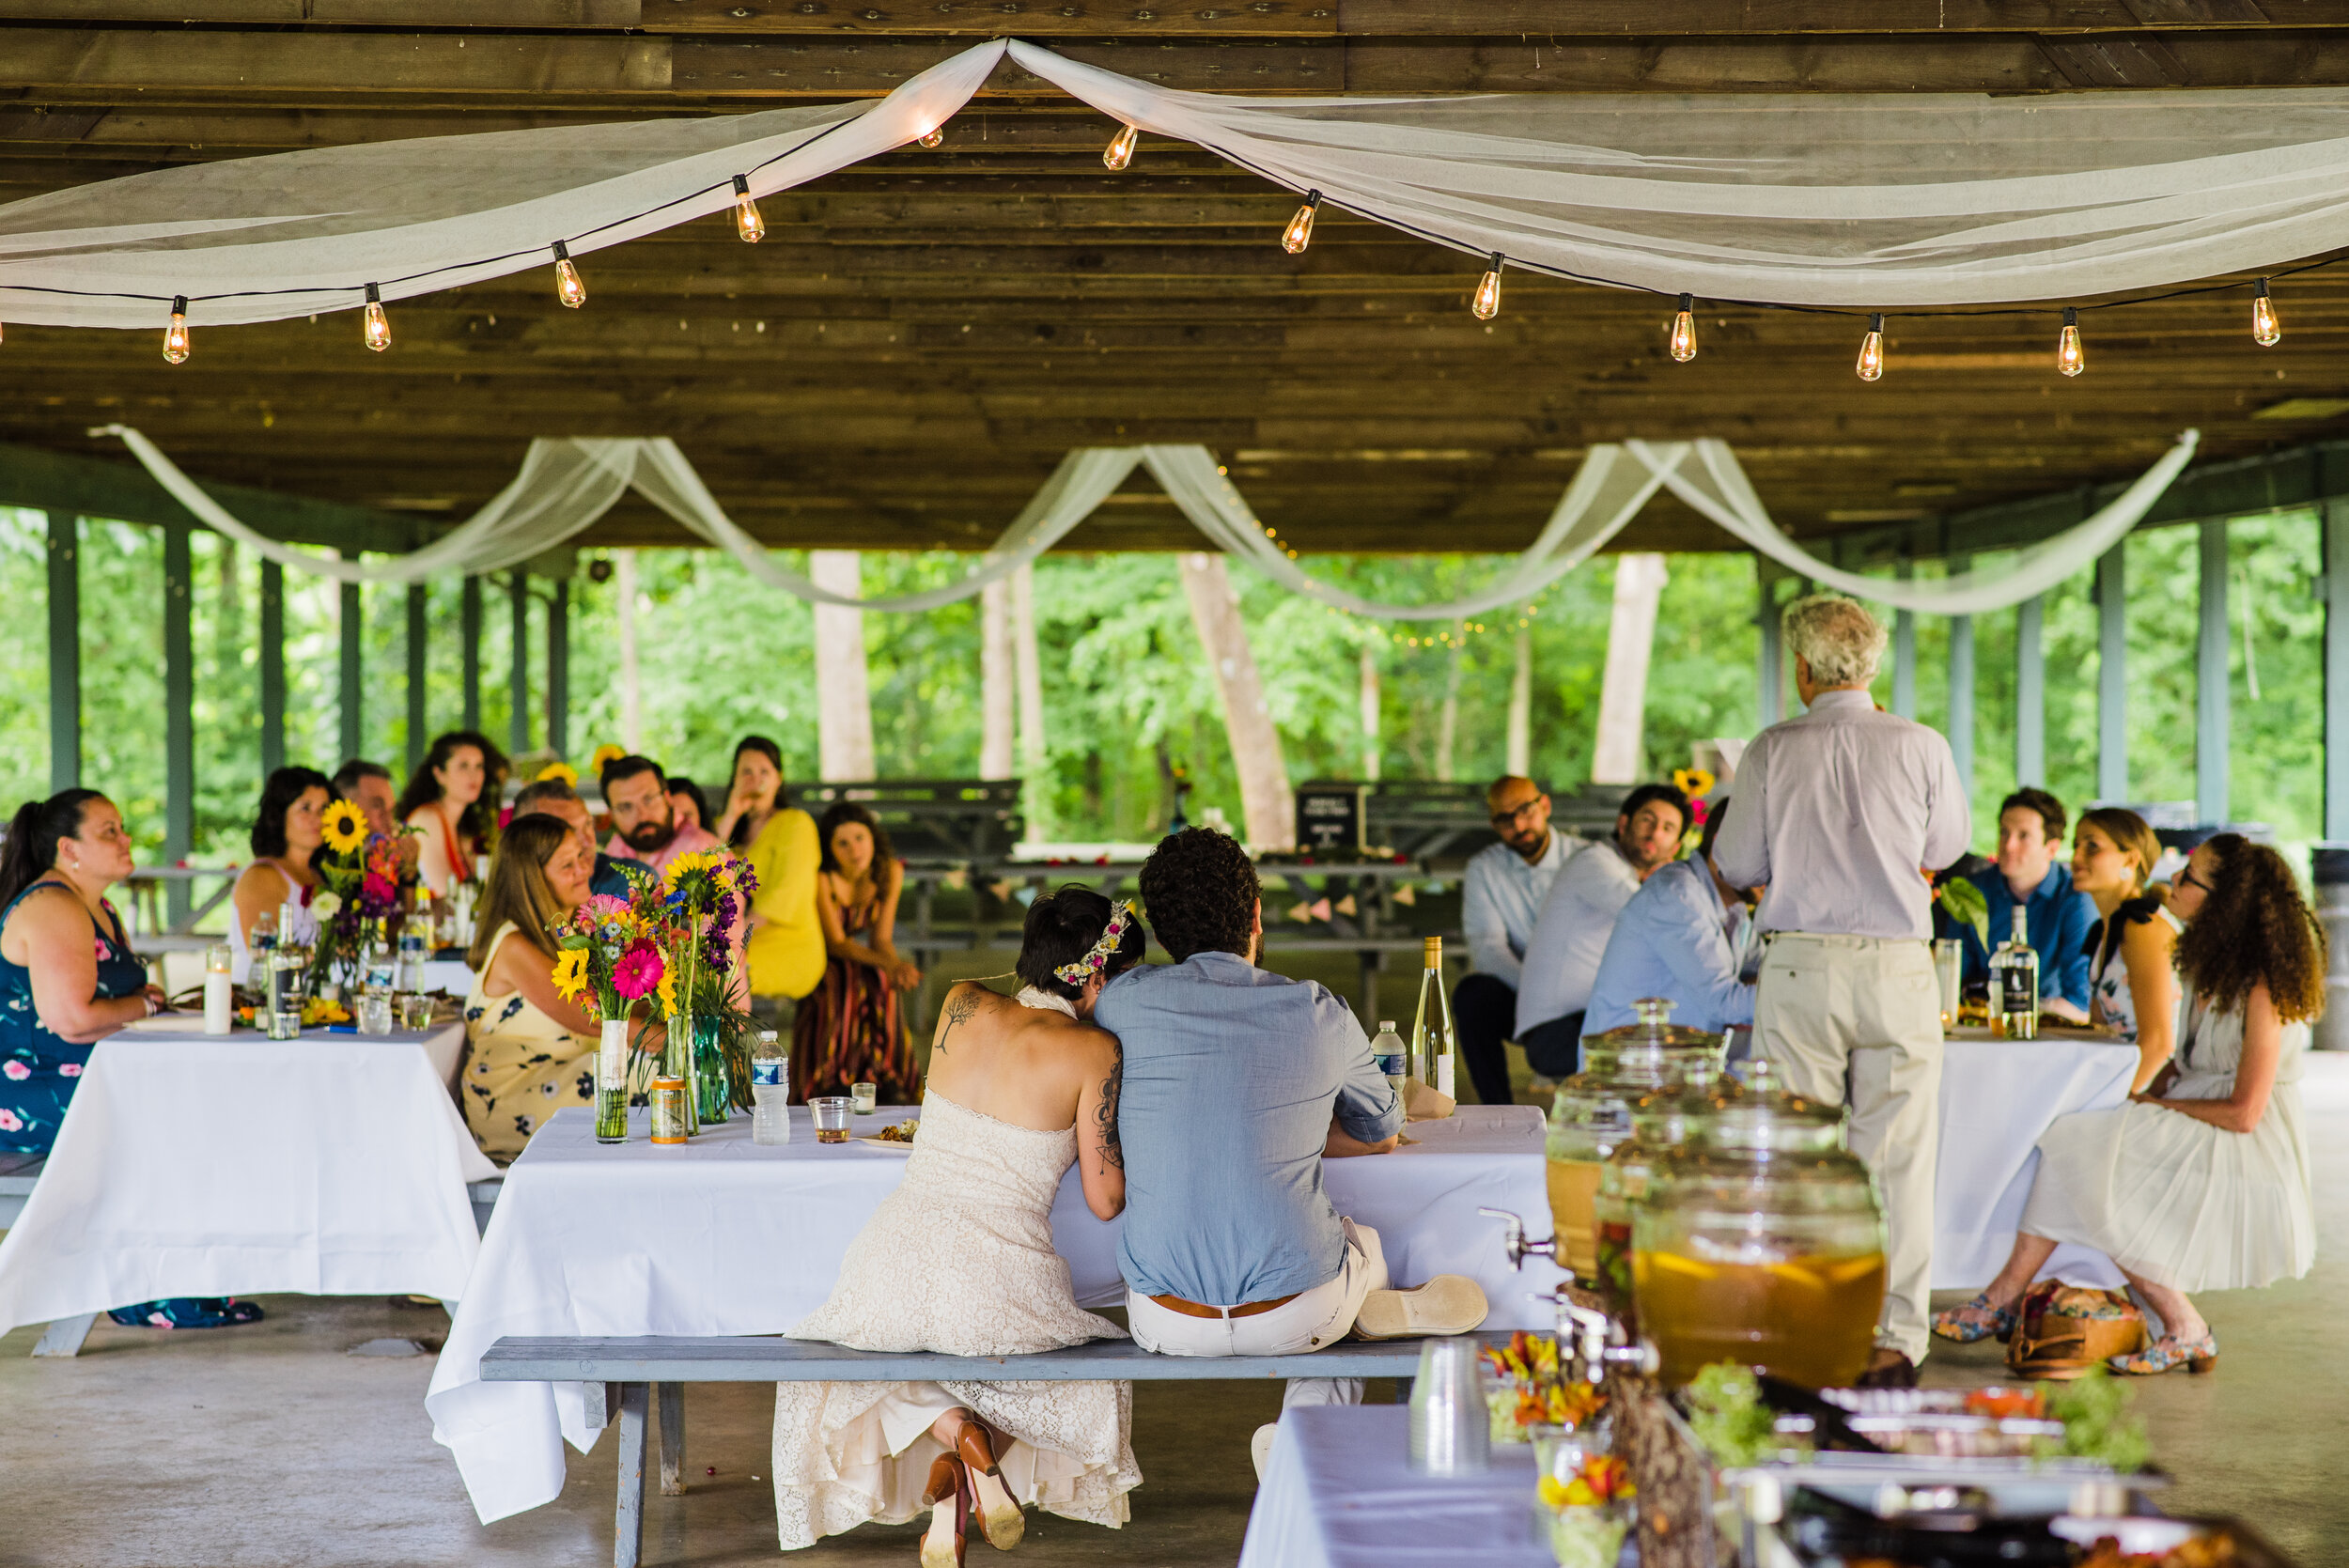 Intimate wedding reception under an outdoor picnic canopy.